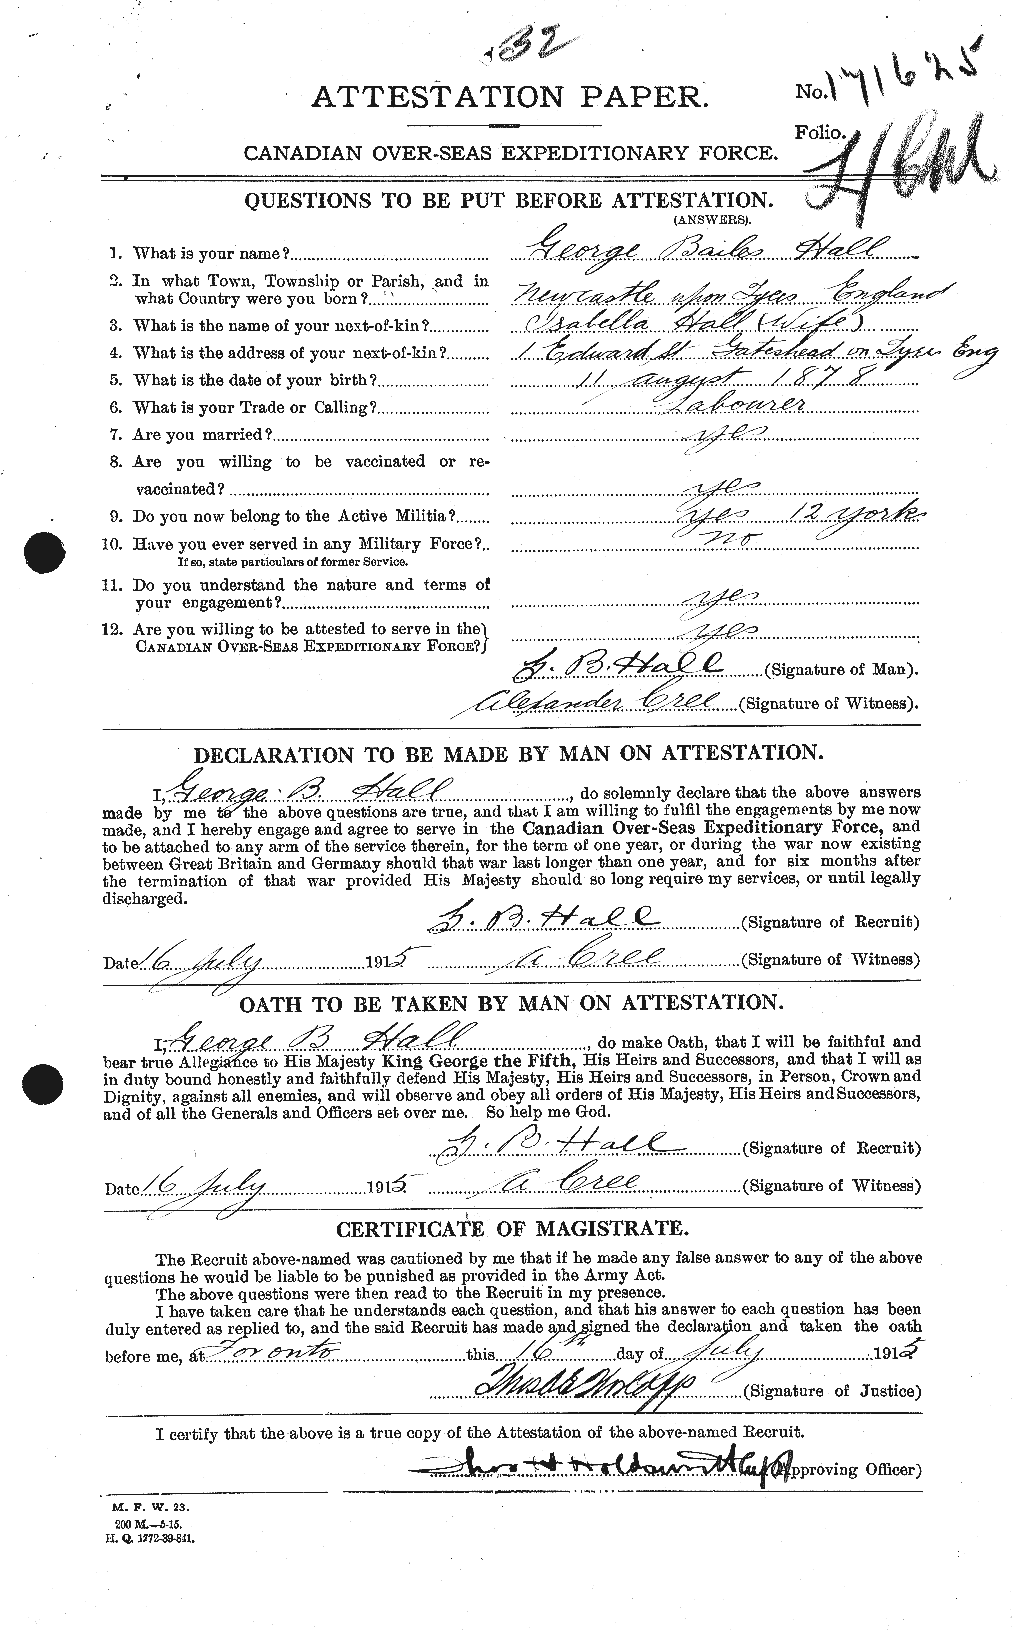 Personnel Records of the First World War - CEF 372854a